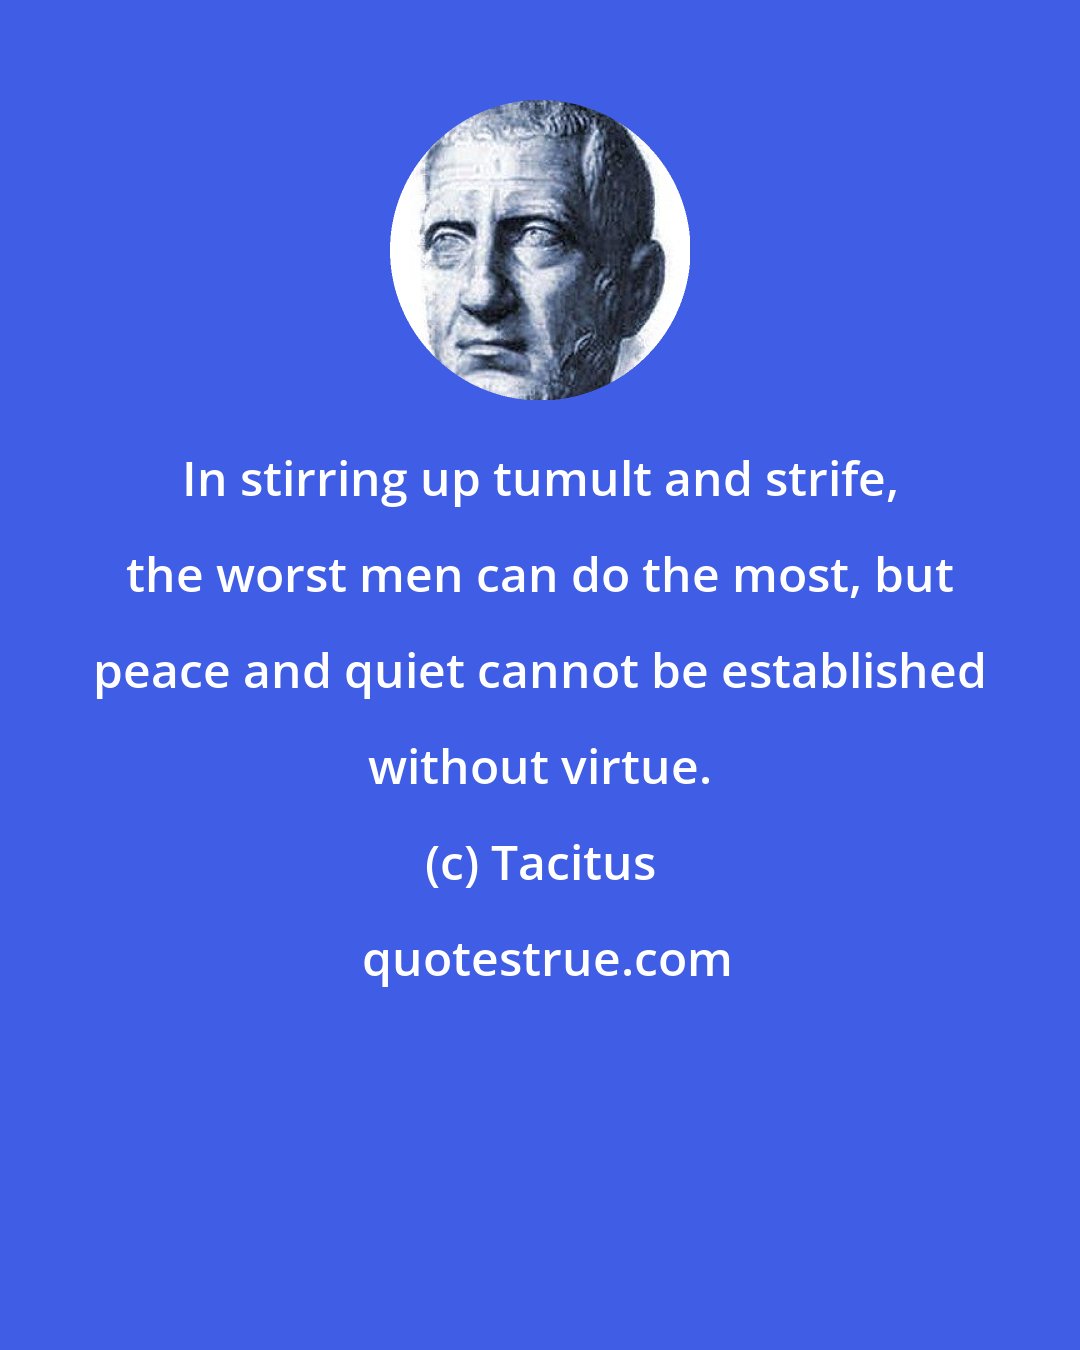 Tacitus: In stirring up tumult and strife, the worst men can do the most, but peace and quiet cannot be established without virtue.